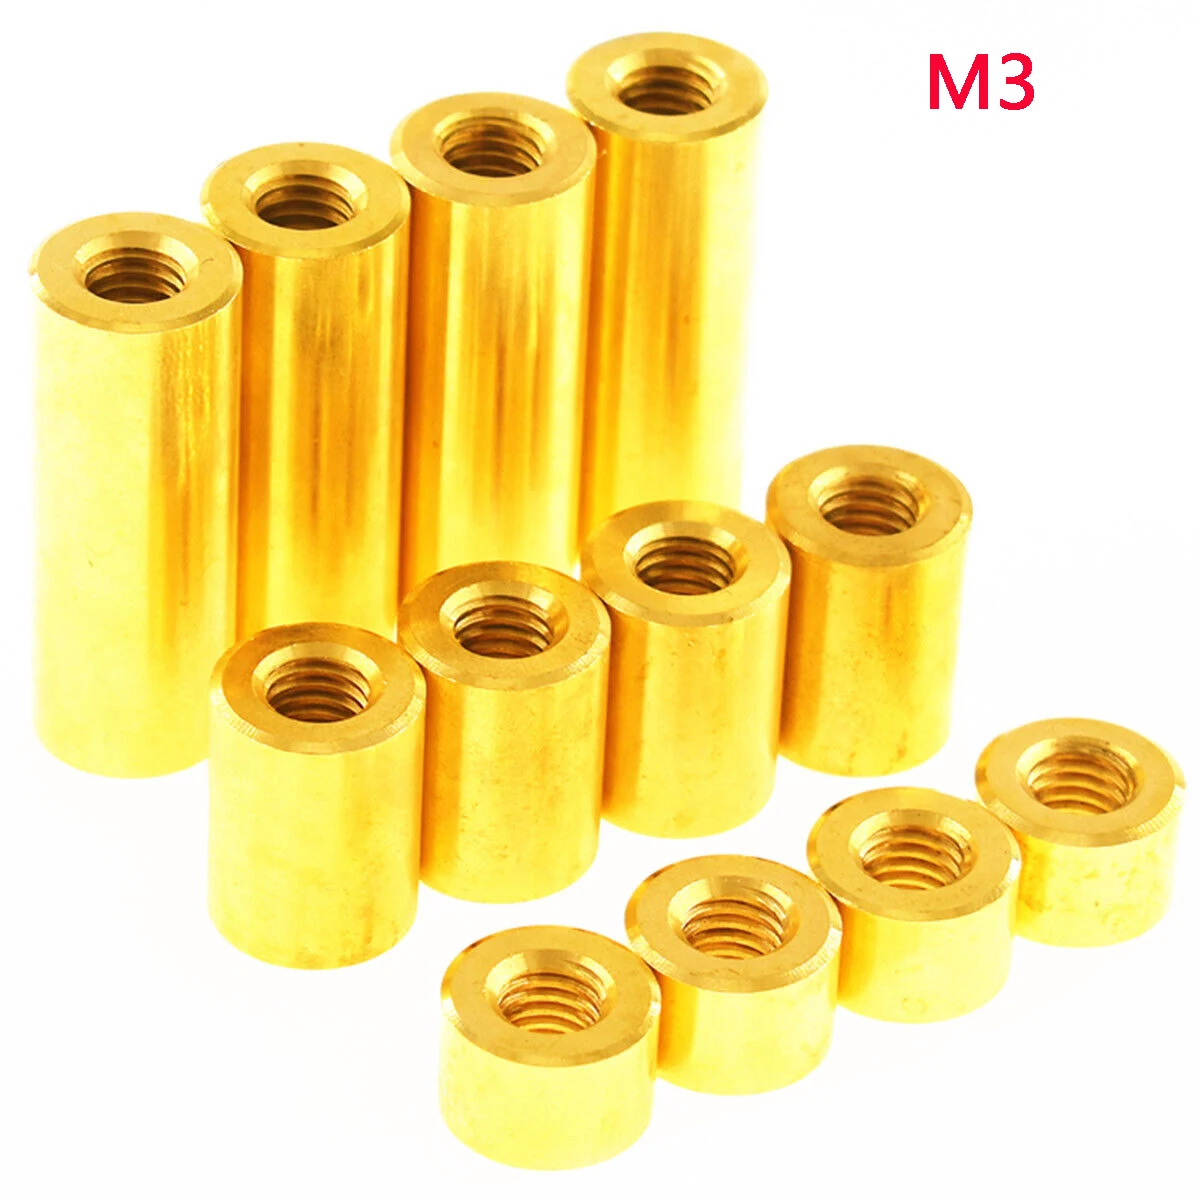 5pcs M3 Length 2~60mm Round Brass Standoff Spacer Stud Spacing Screw Thumb Nut Female Thread Hollow Pillars Double Pass PCB